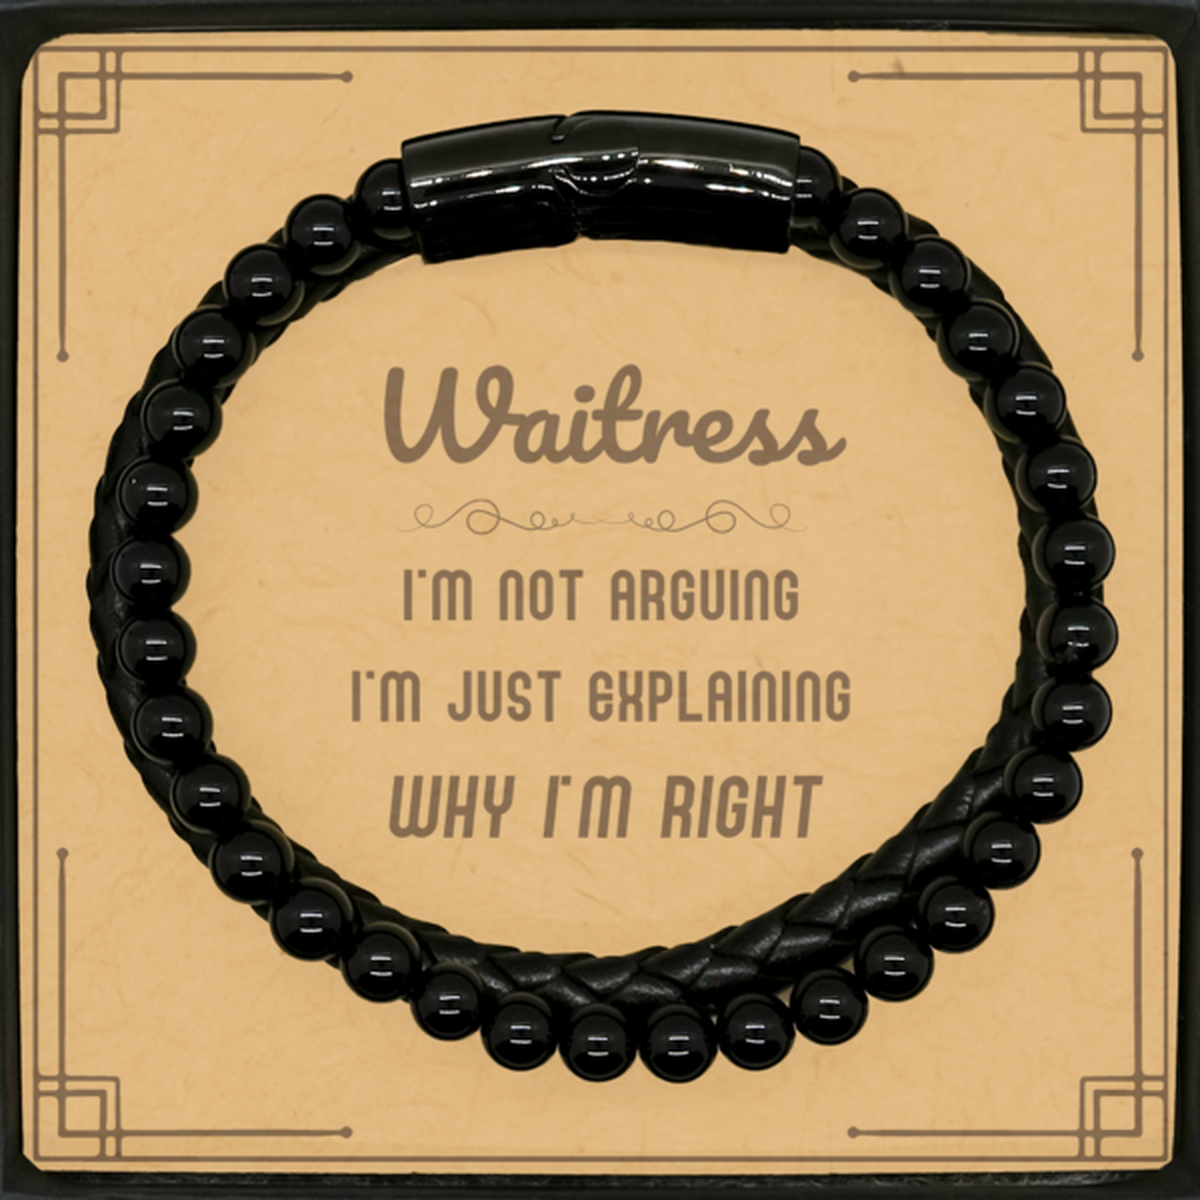 Waitress I'm not Arguing. I'm Just Explaining Why I'm RIGHT Stone Leather Bracelets, Funny Saying Quote Waitress Gifts For Waitress Message Card Graduation Birthday Christmas Gifts for Men Women Coworker